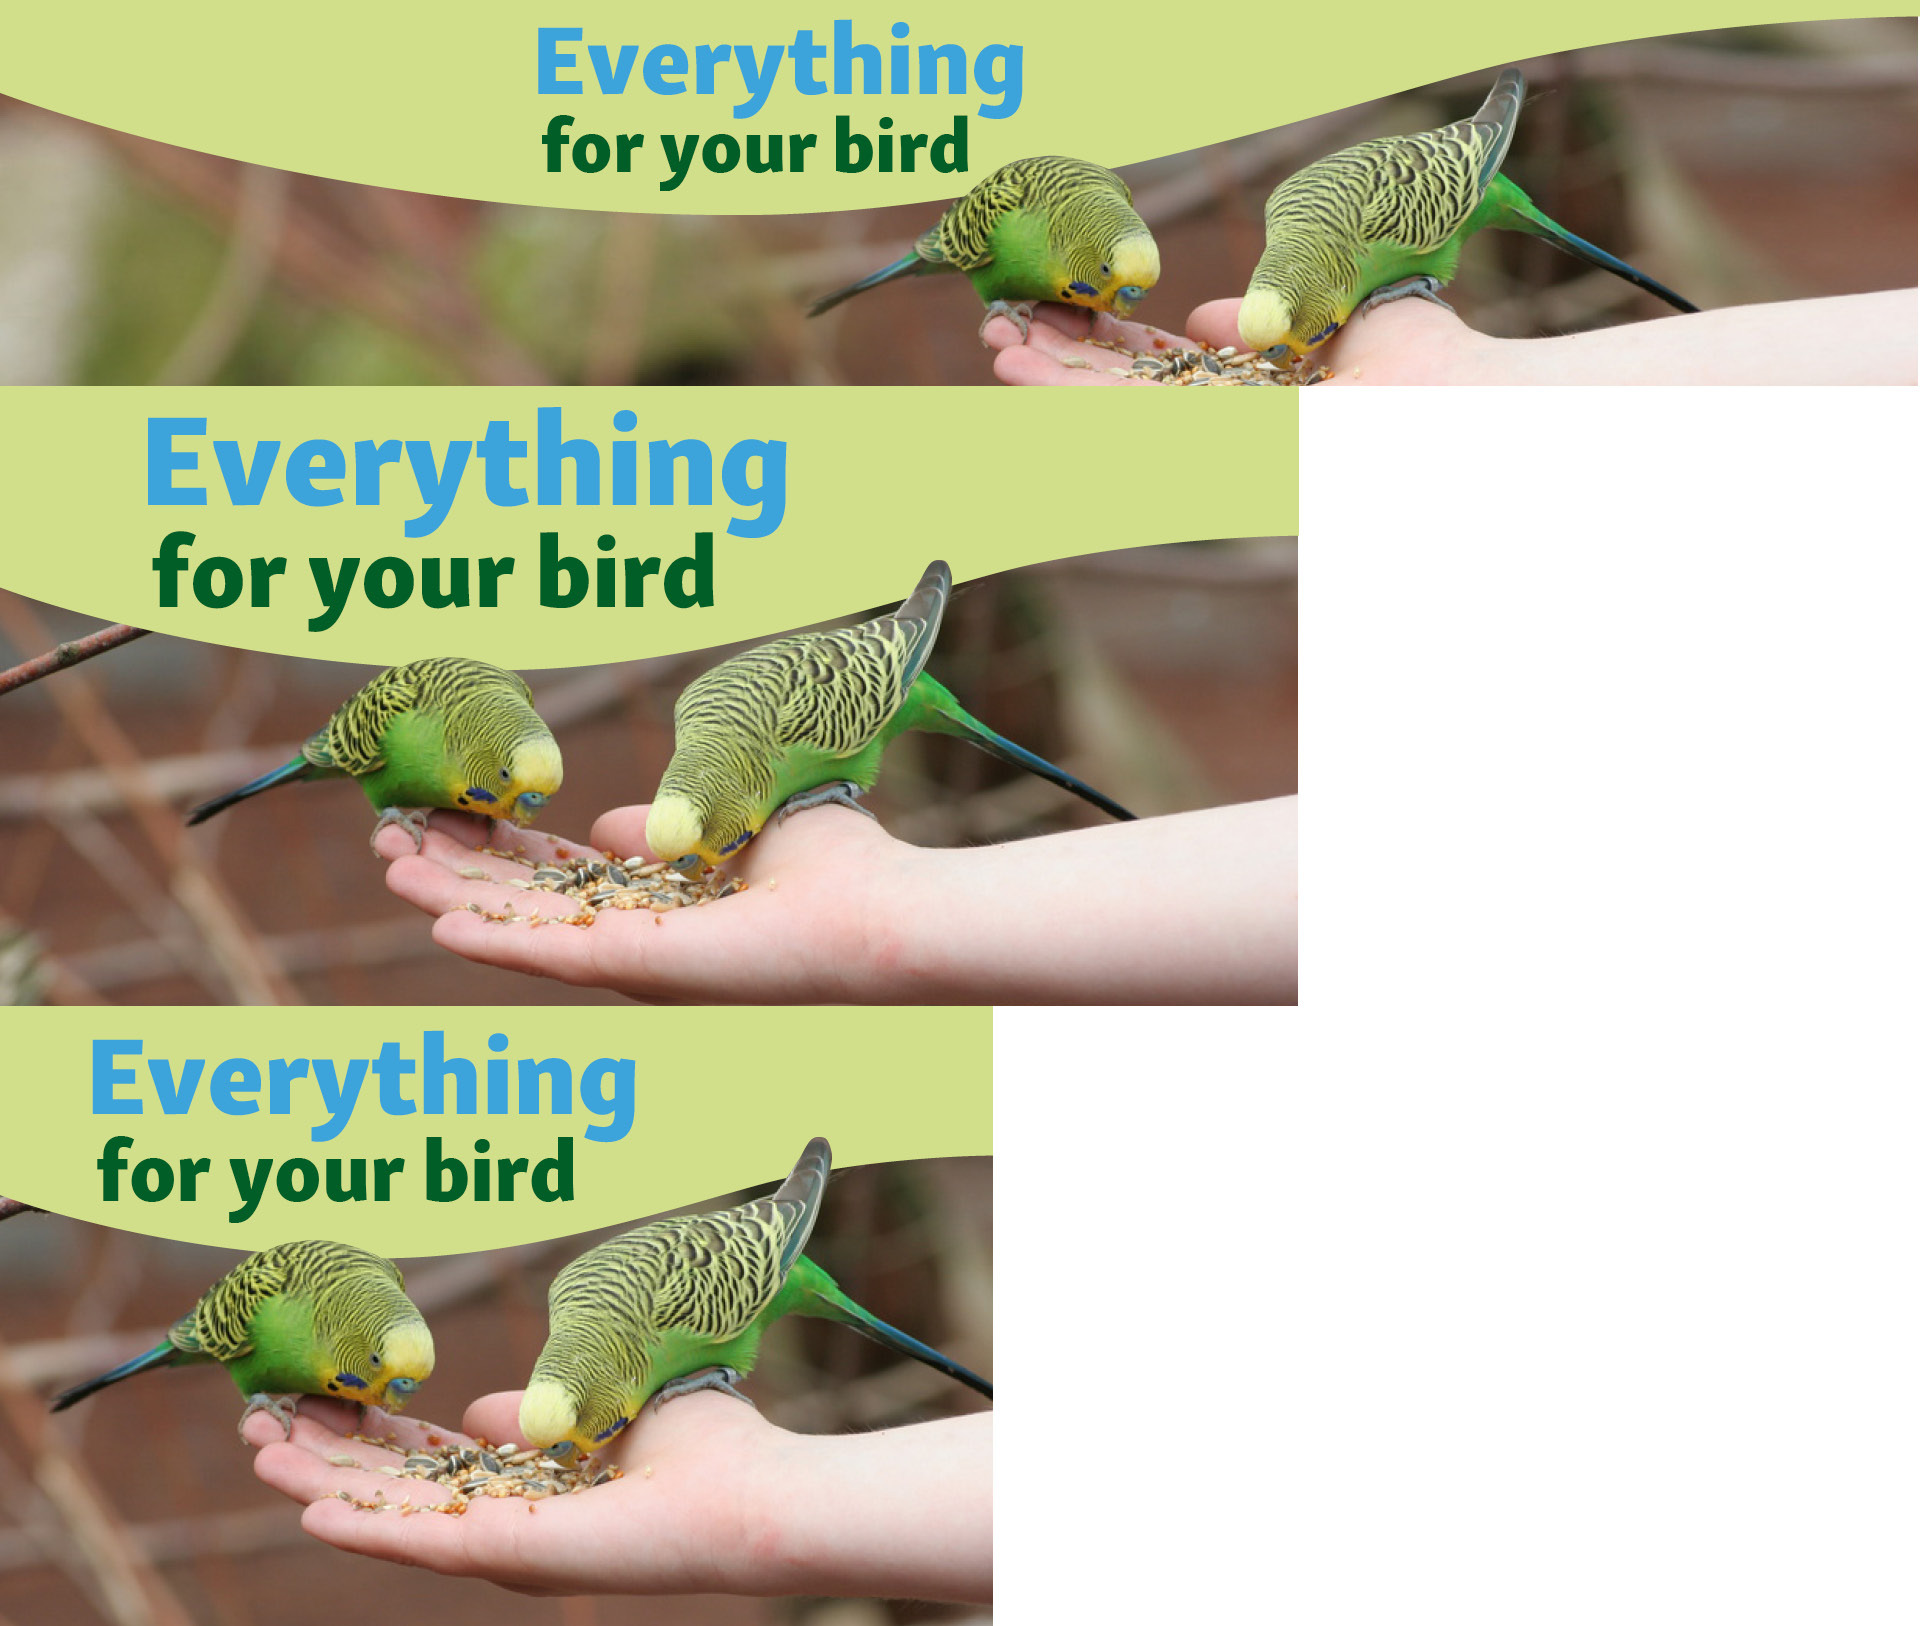 Everything for your bird